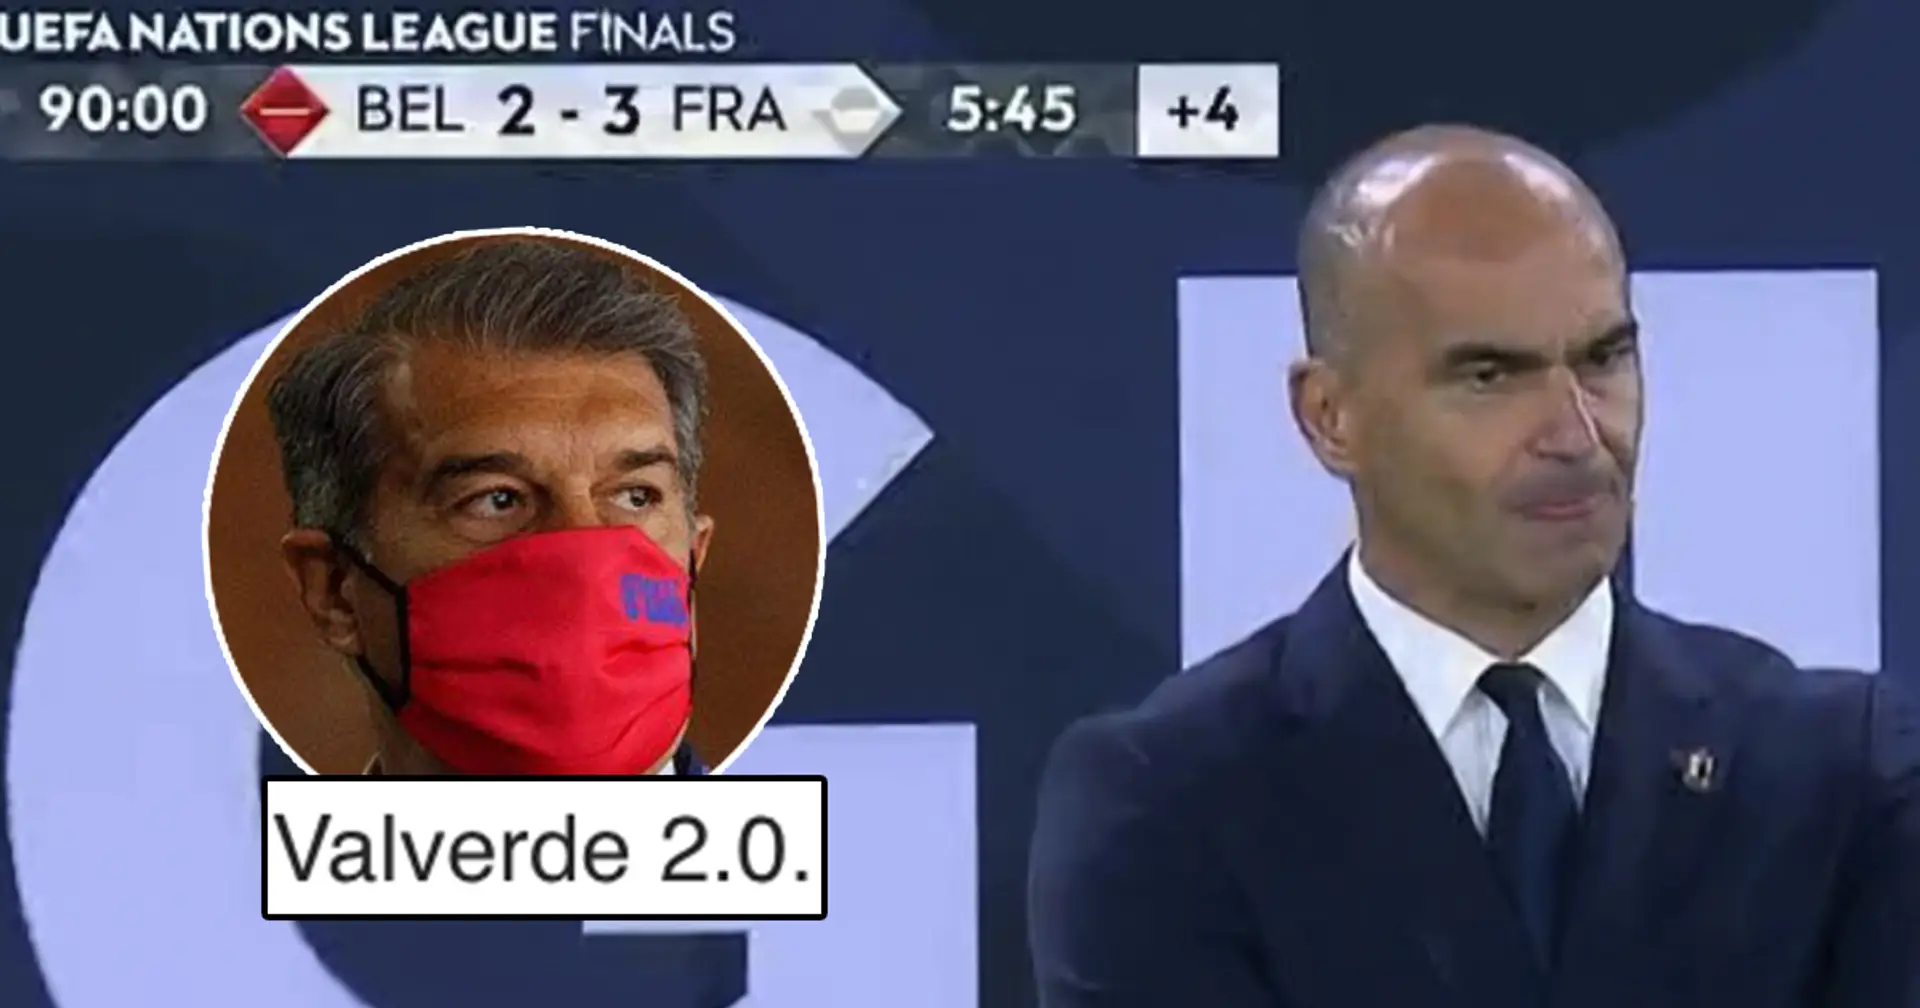 'Shouldn't even dream of Barca': Cules react as Roberto Martinez bottles 2-0 lead to lose 3-2 to France